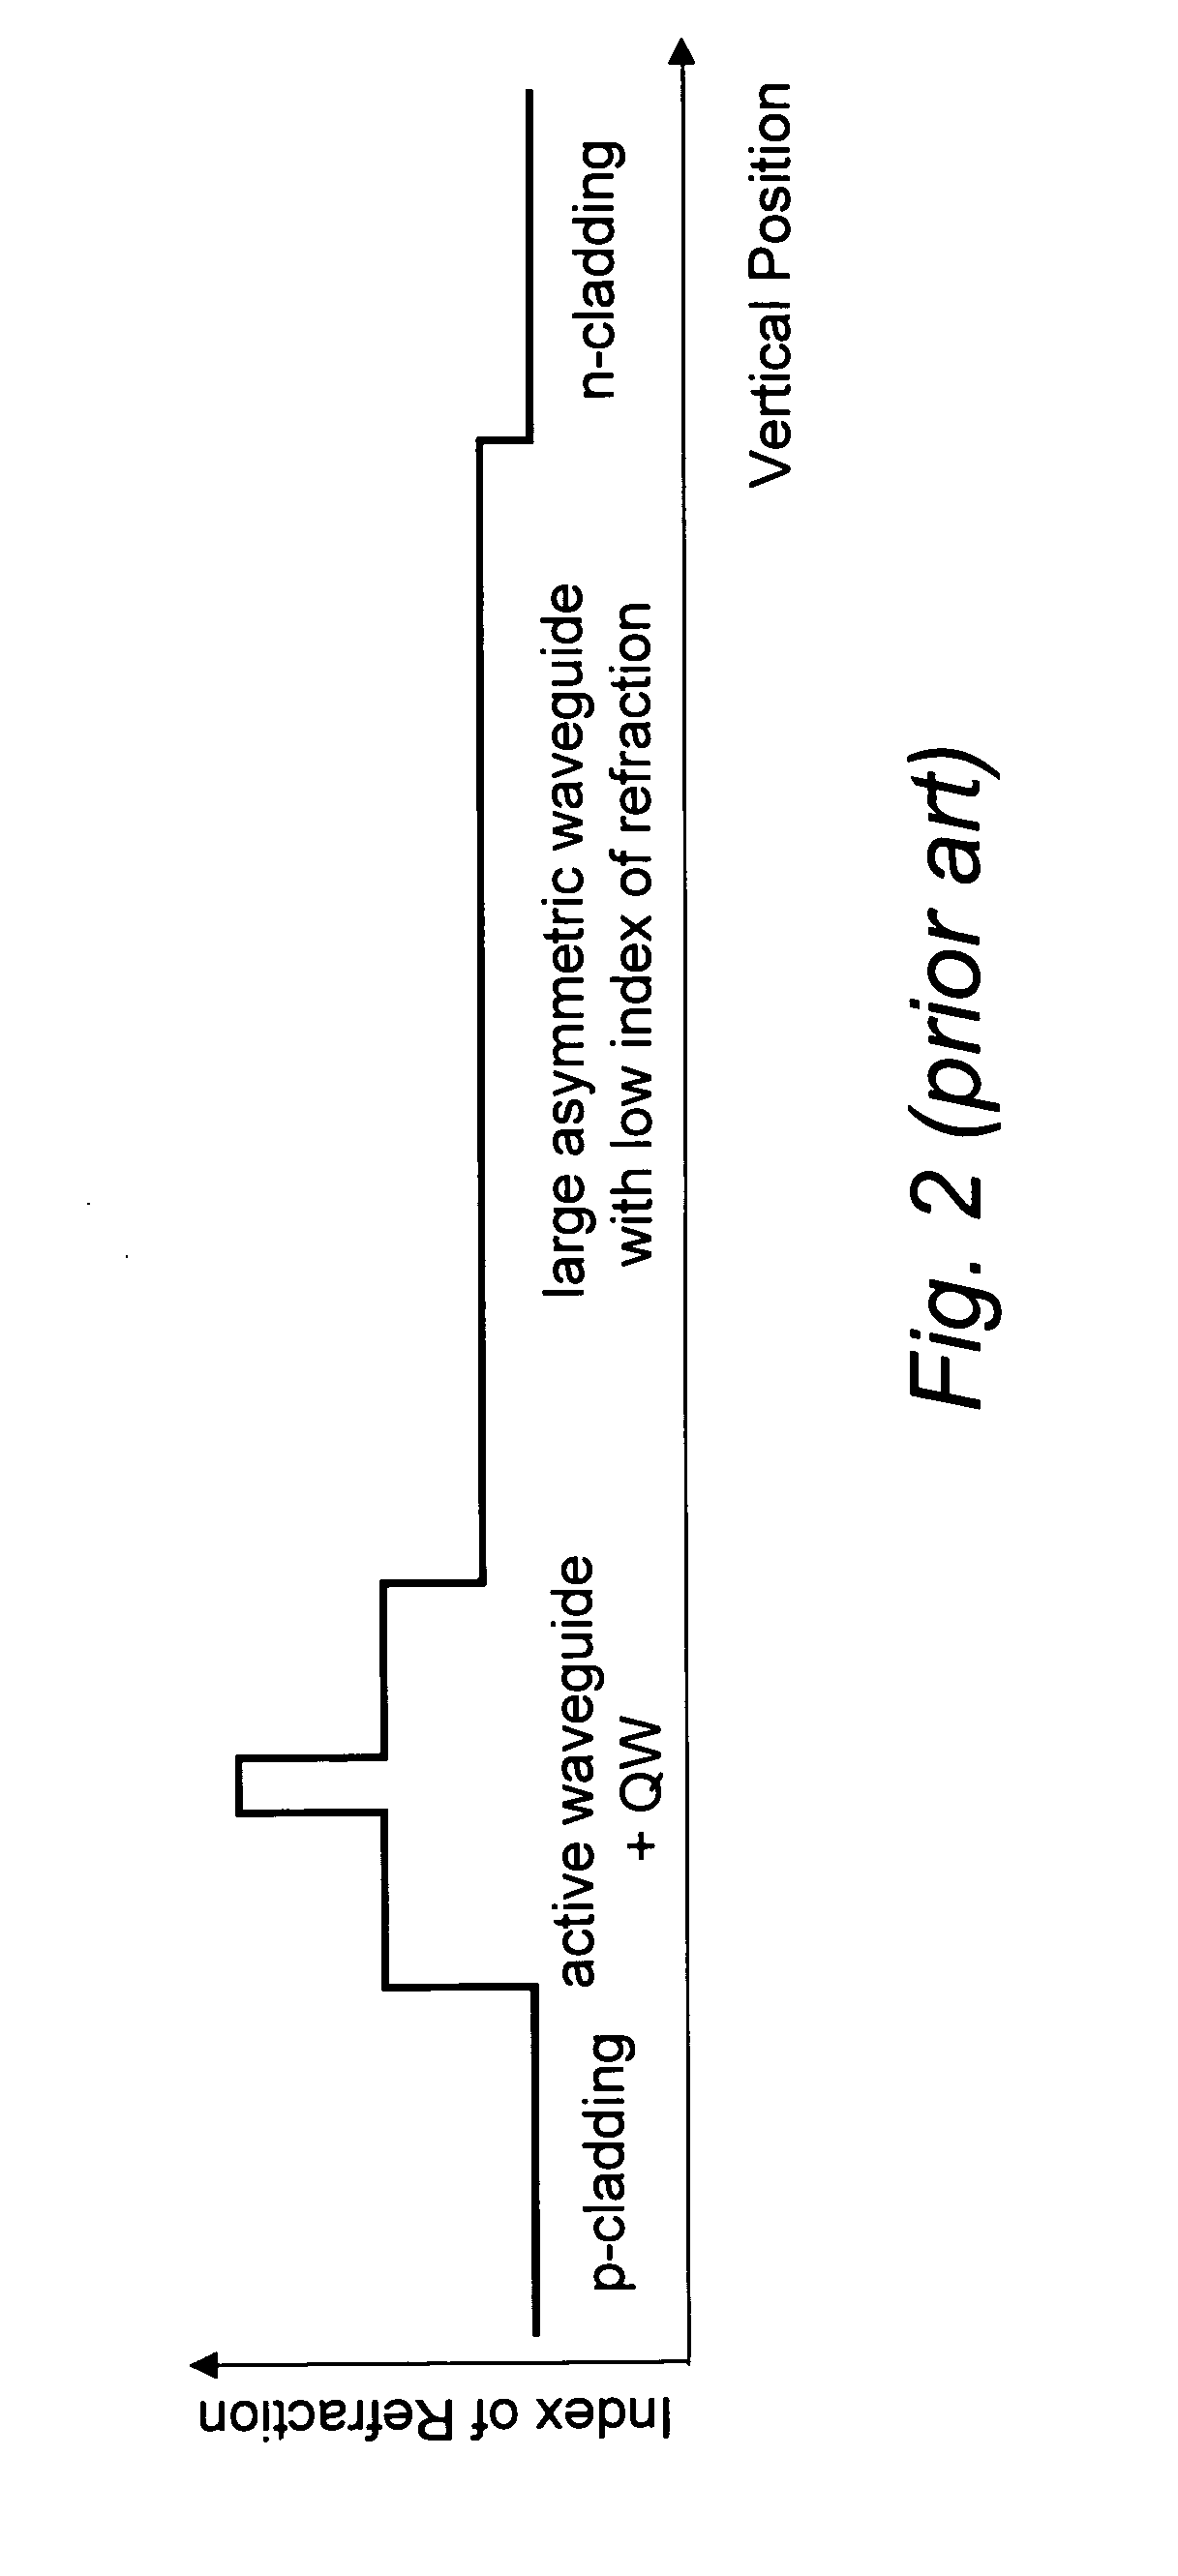 High power semiconductor laser with a large optical superlattice waveguide